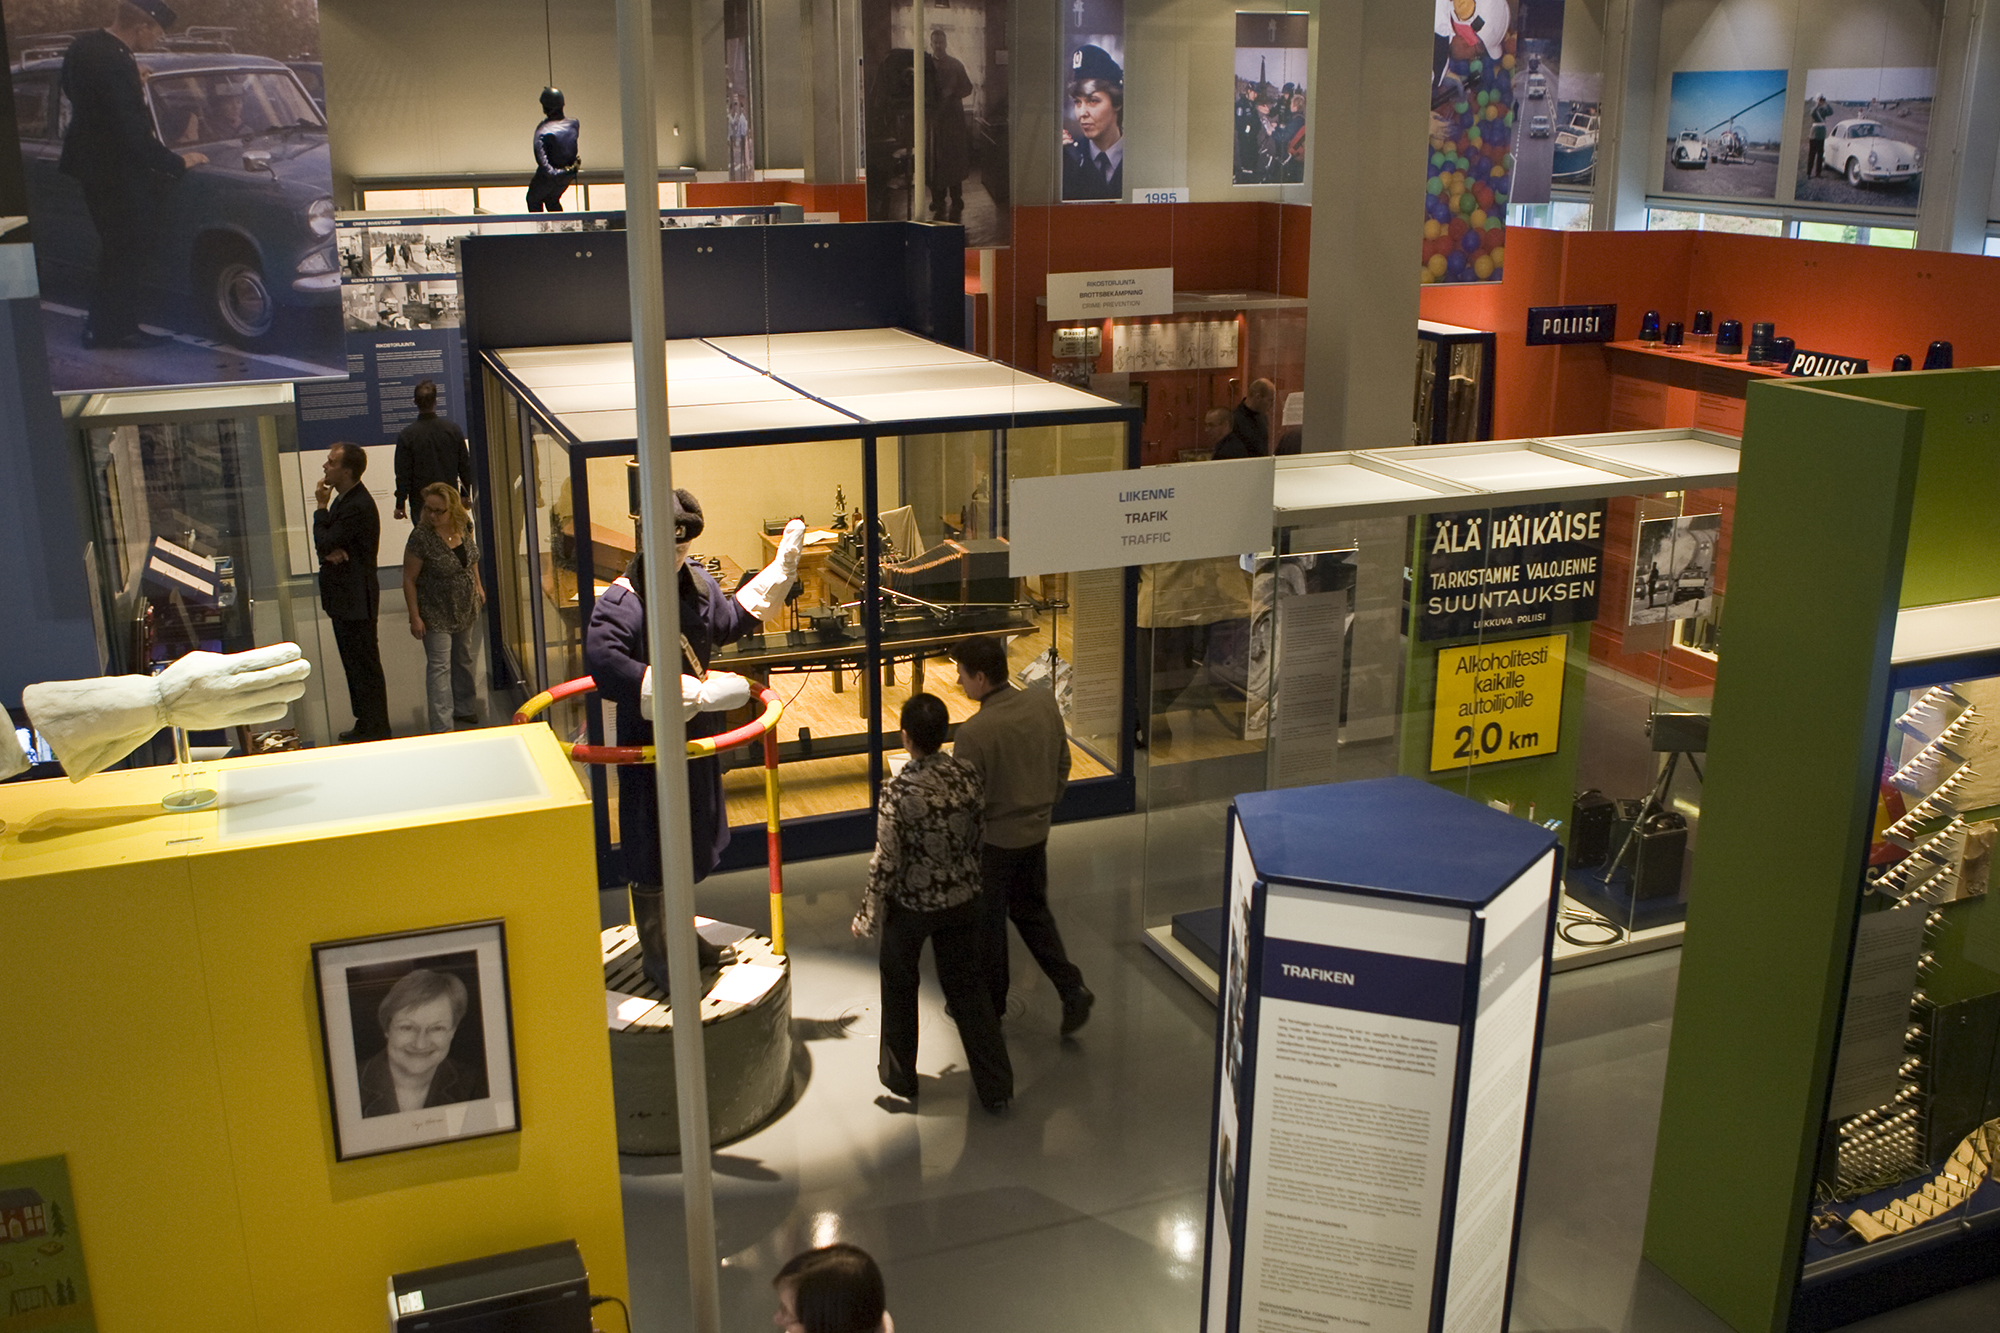 General view of the Police Museum’s exhibition. The picture shows museum visitors walking between the showcases, and in the room, for example photographs and items relating to police work are seen. Photo The Police Museum